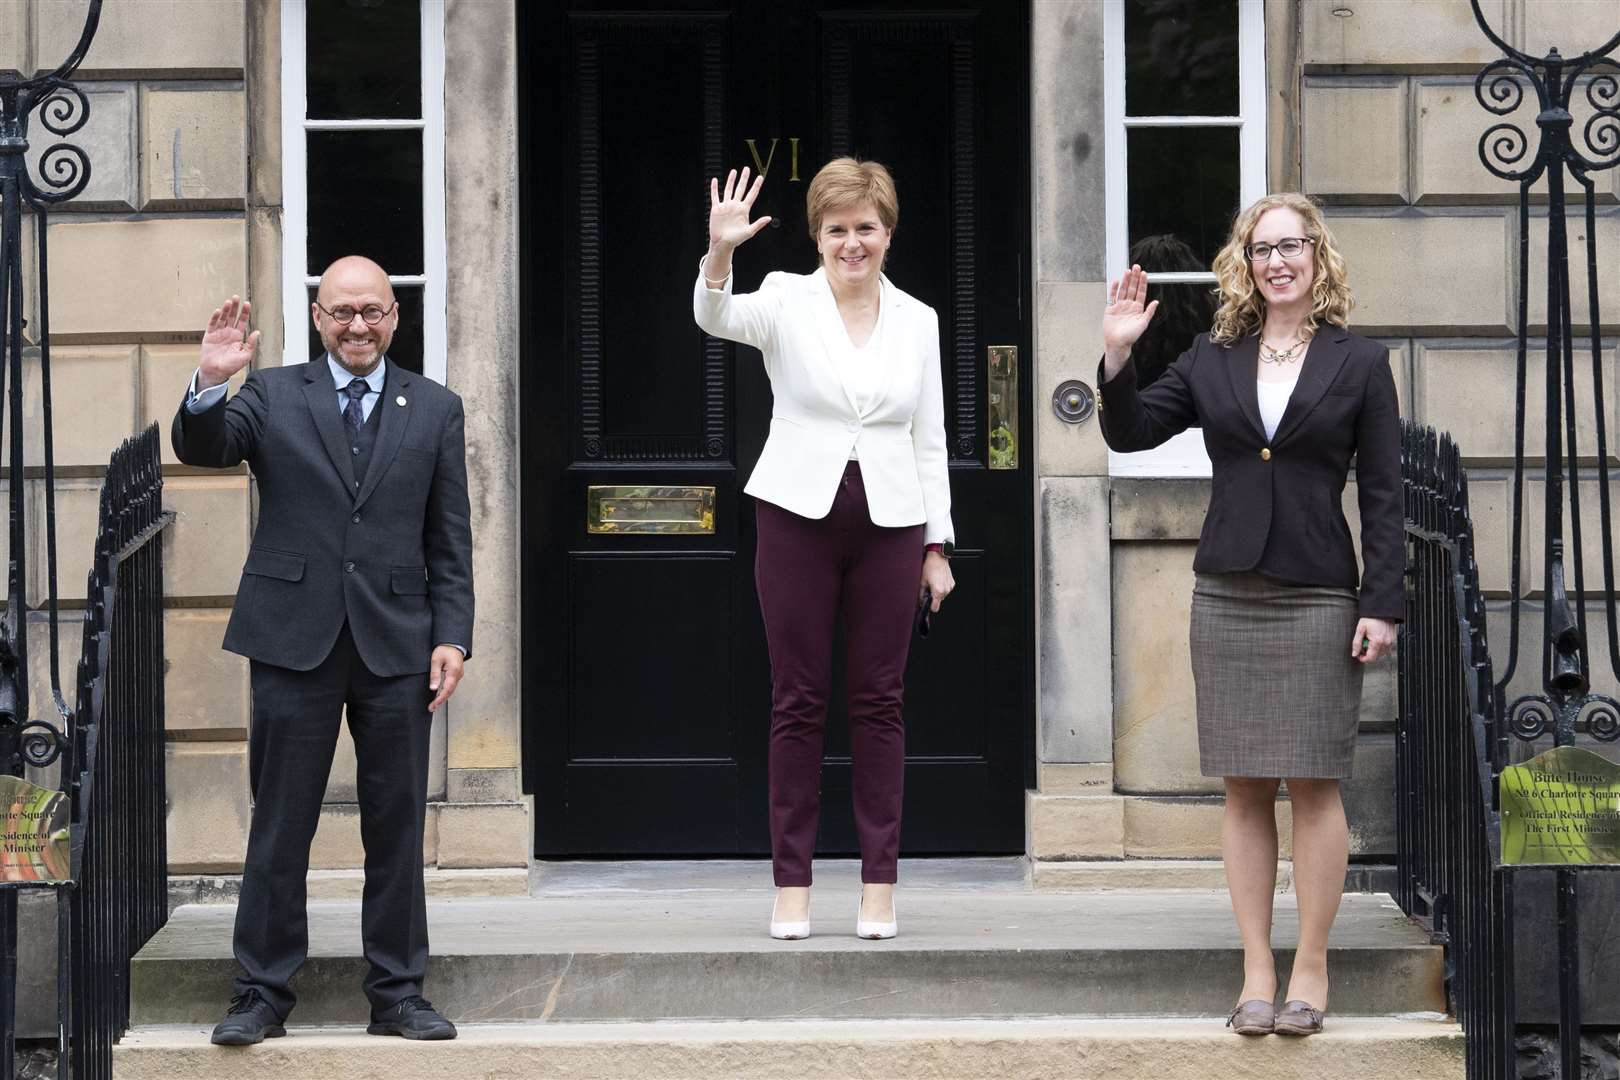 Nicola Sturgeon was first minister when the deal was forged (Lesley Martin/PA)